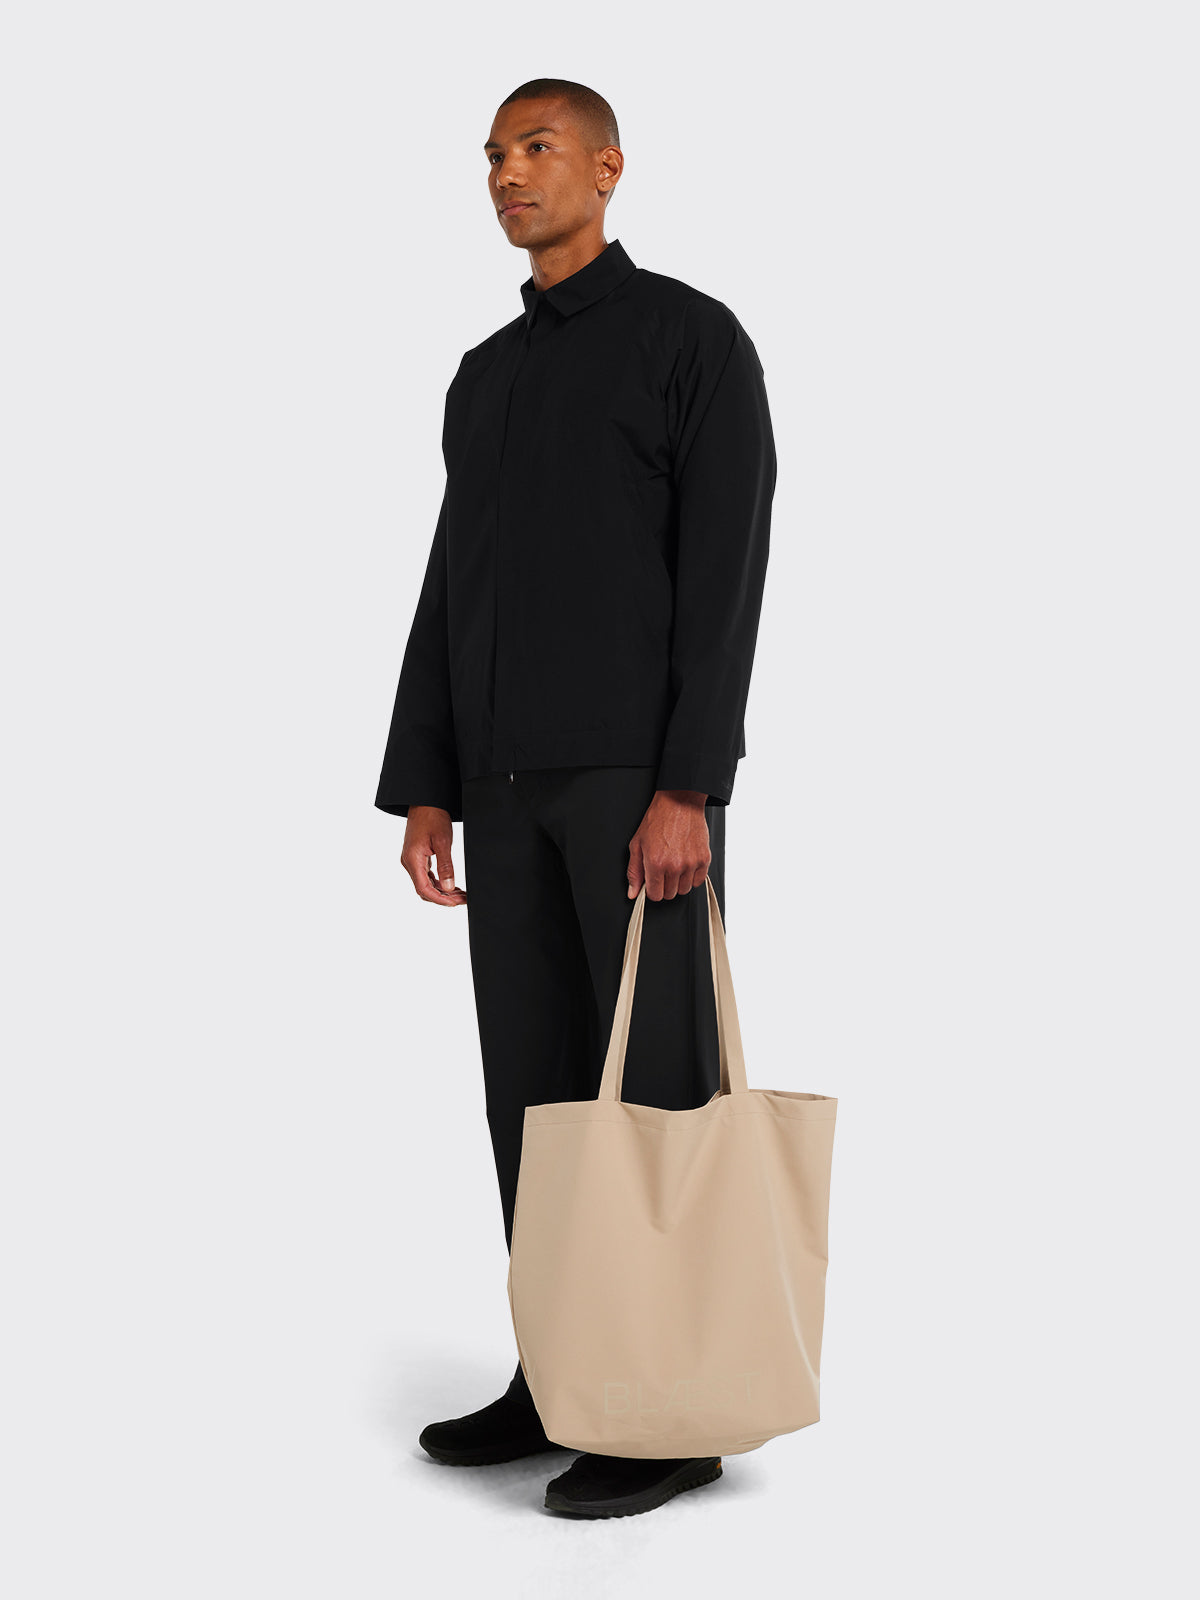 Man holding Moa tote bag in Beige from Blæst